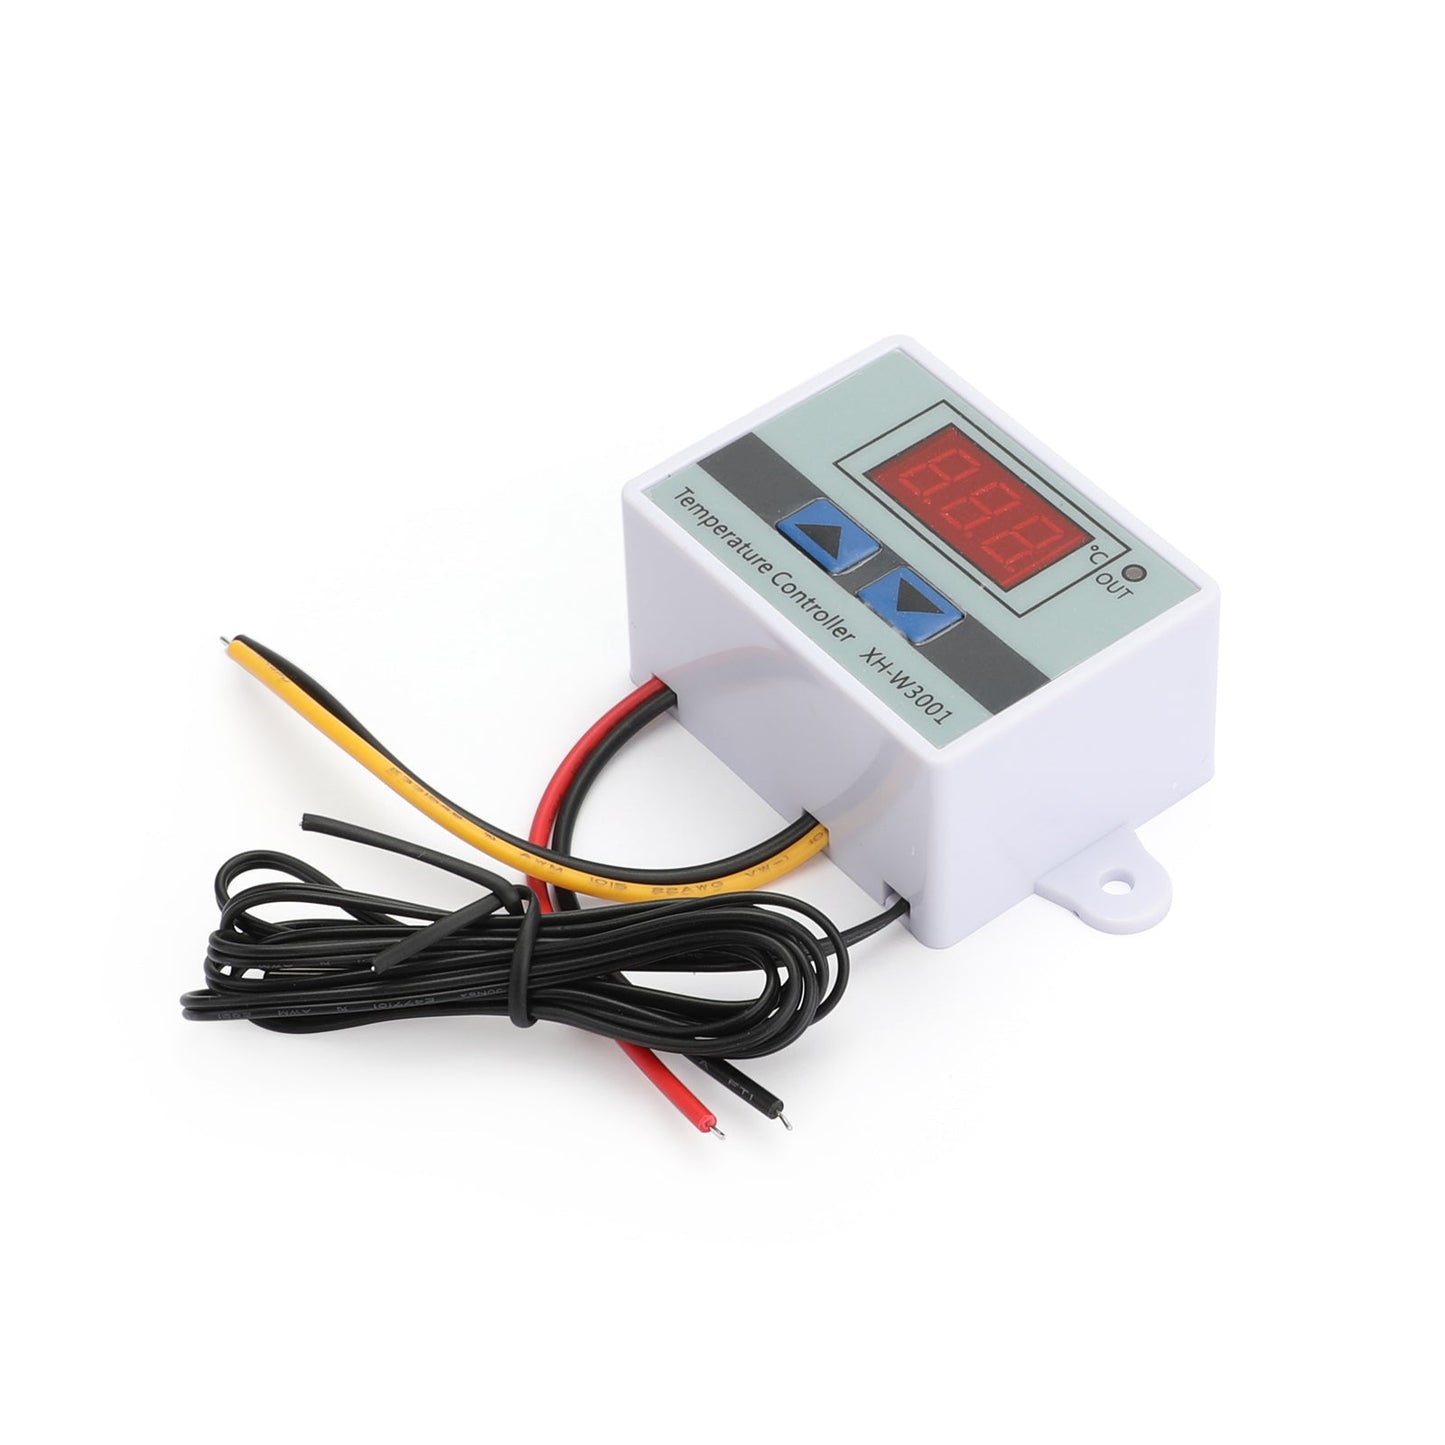 DC 24V Digital LED Temperature Controller Thermostat XH-W3001 Switch Probe